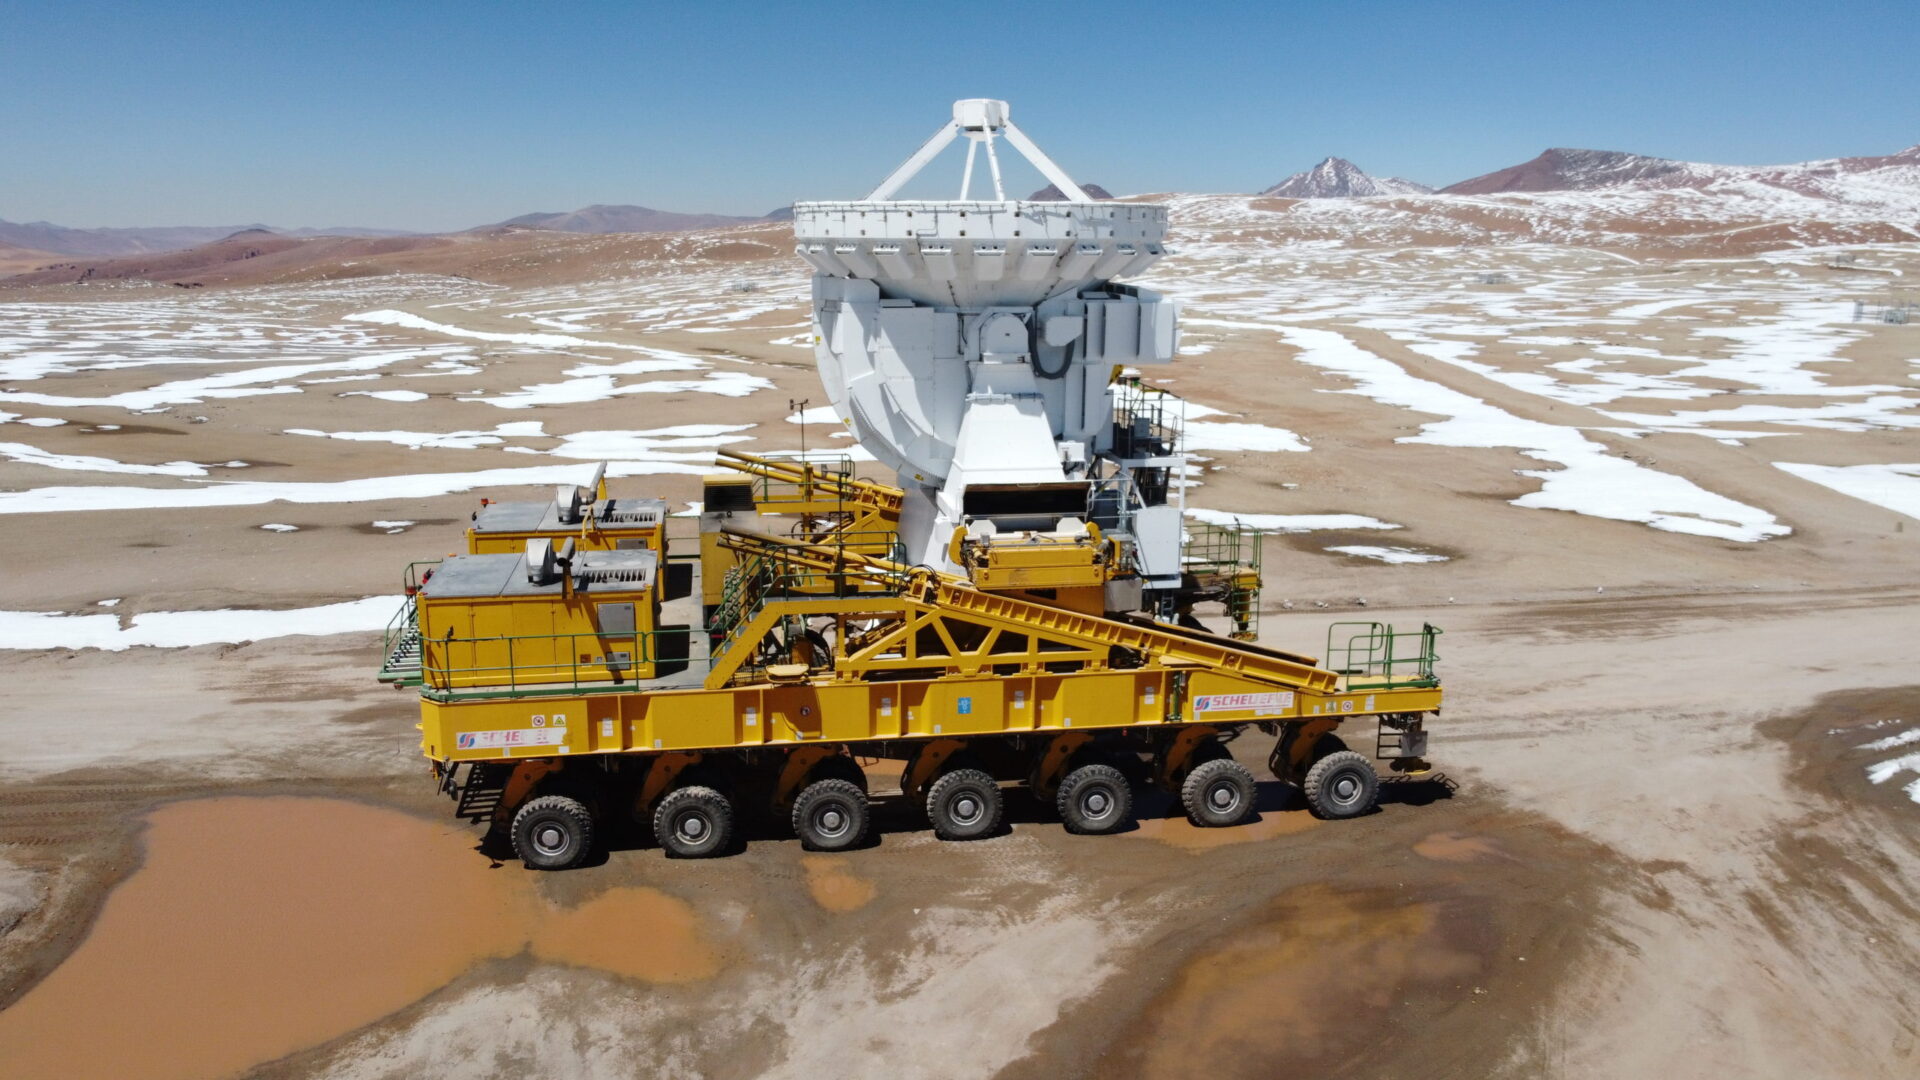 <p>After a blizzard, the antenna transporter Lore returns to its regular duties on the Chajnantor plateau (5,000m altitude).<br />
Credit: Juan Carlos Rojas - ALMA (ESO/NAOJ/NRAO)</p>
